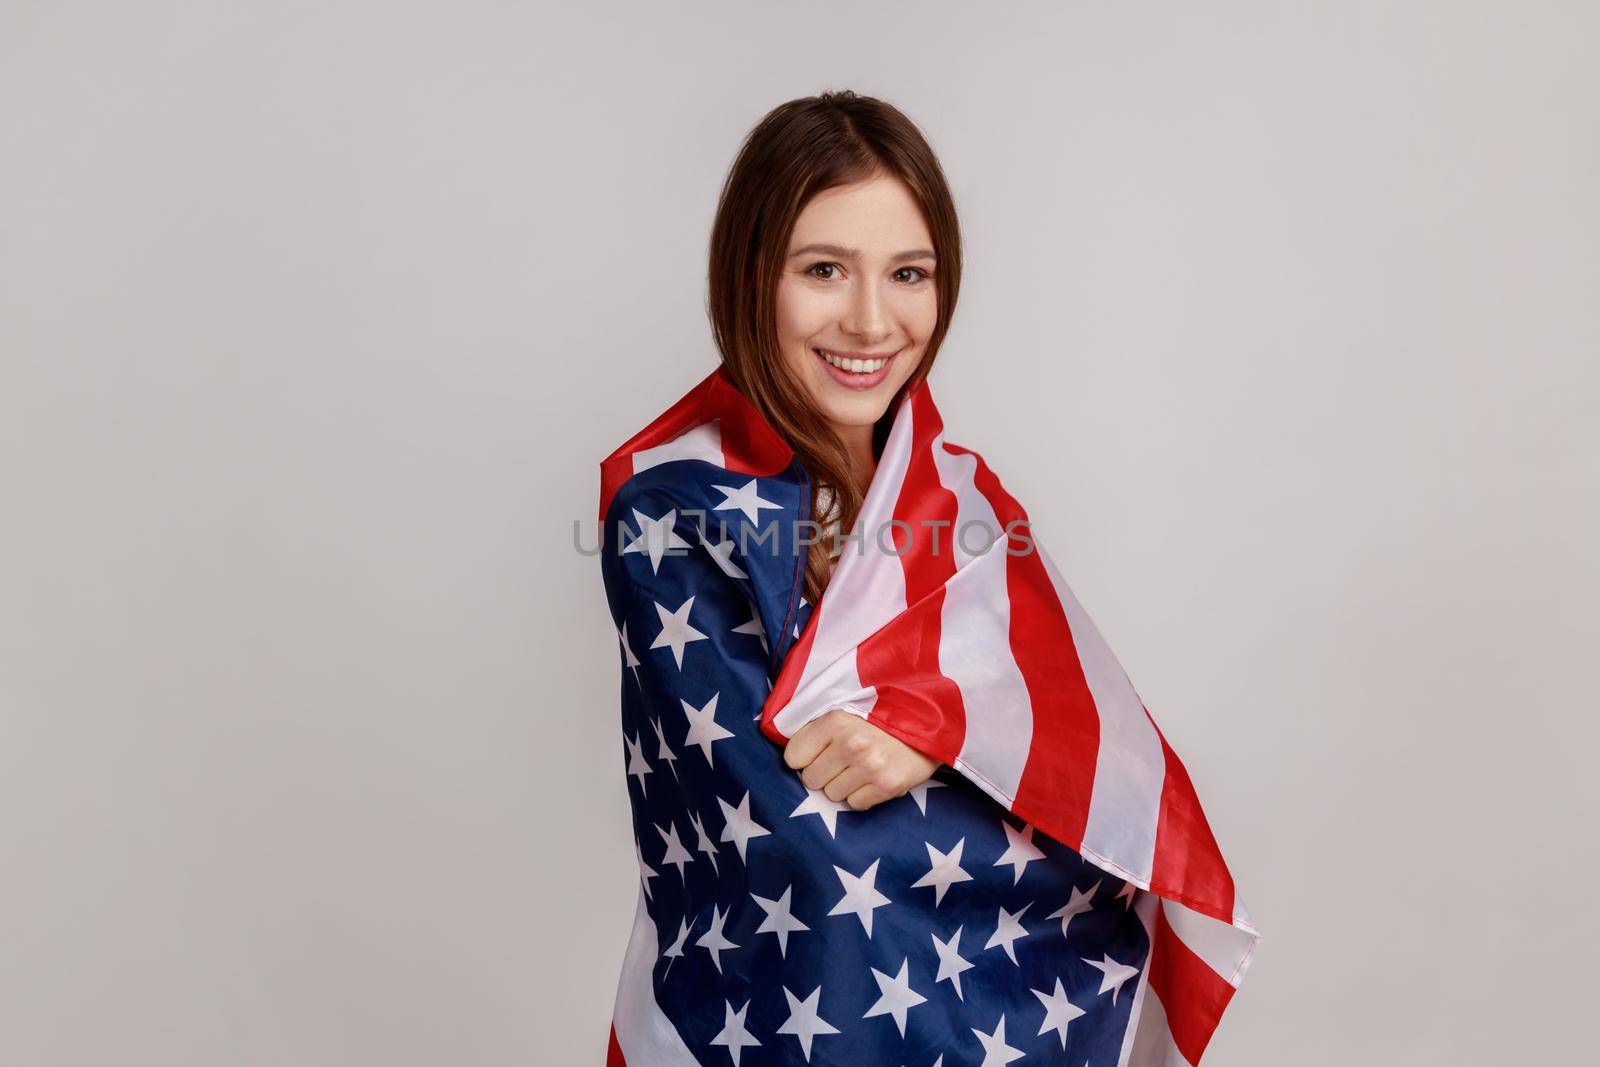 Portrait of friendly young woman standing wrapped in American flag looking at camera and smiling, wearing white casual style T-shirt. Indoor studio shot isolated on gray background.